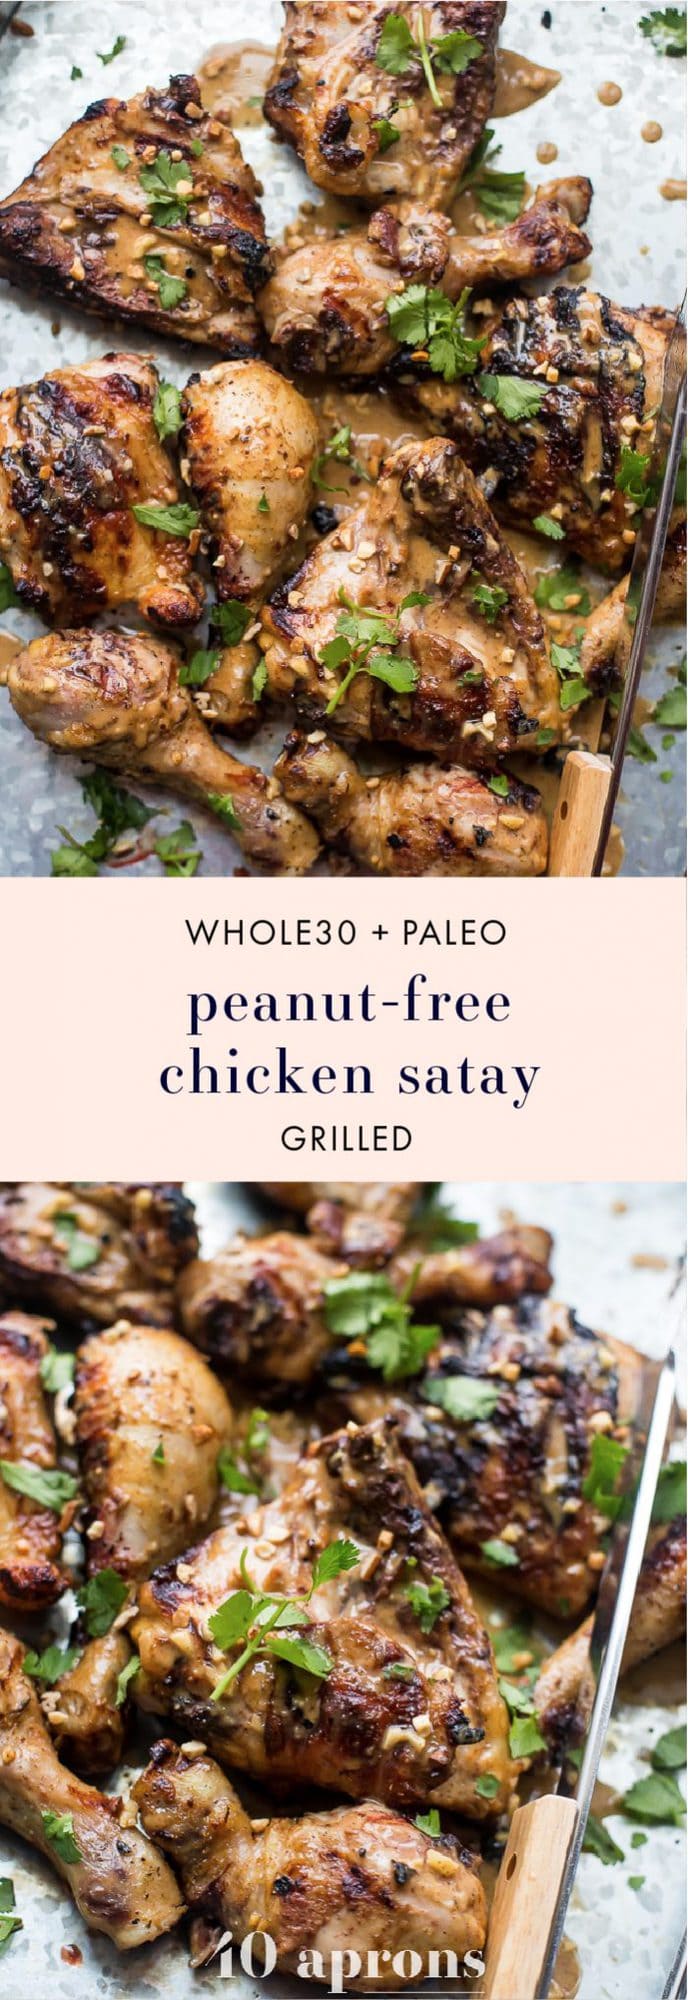 This grilled peanut-free chicken satay tastes just like the Thai classic but without any peanuts. It comes together quickly and won't heat up the kitchen, making this peanut-free chicken satay bound to be one of your favorite grilled paleo or grilled Whole30 recipes. This peanut-free chicken satay is stinkin' delicious and is such a great Whole30 dinner recipe or paleo dinner recipe. Even better that it's a grilled paleo recipe and grilled Whole30 recipe, right?! Yum!